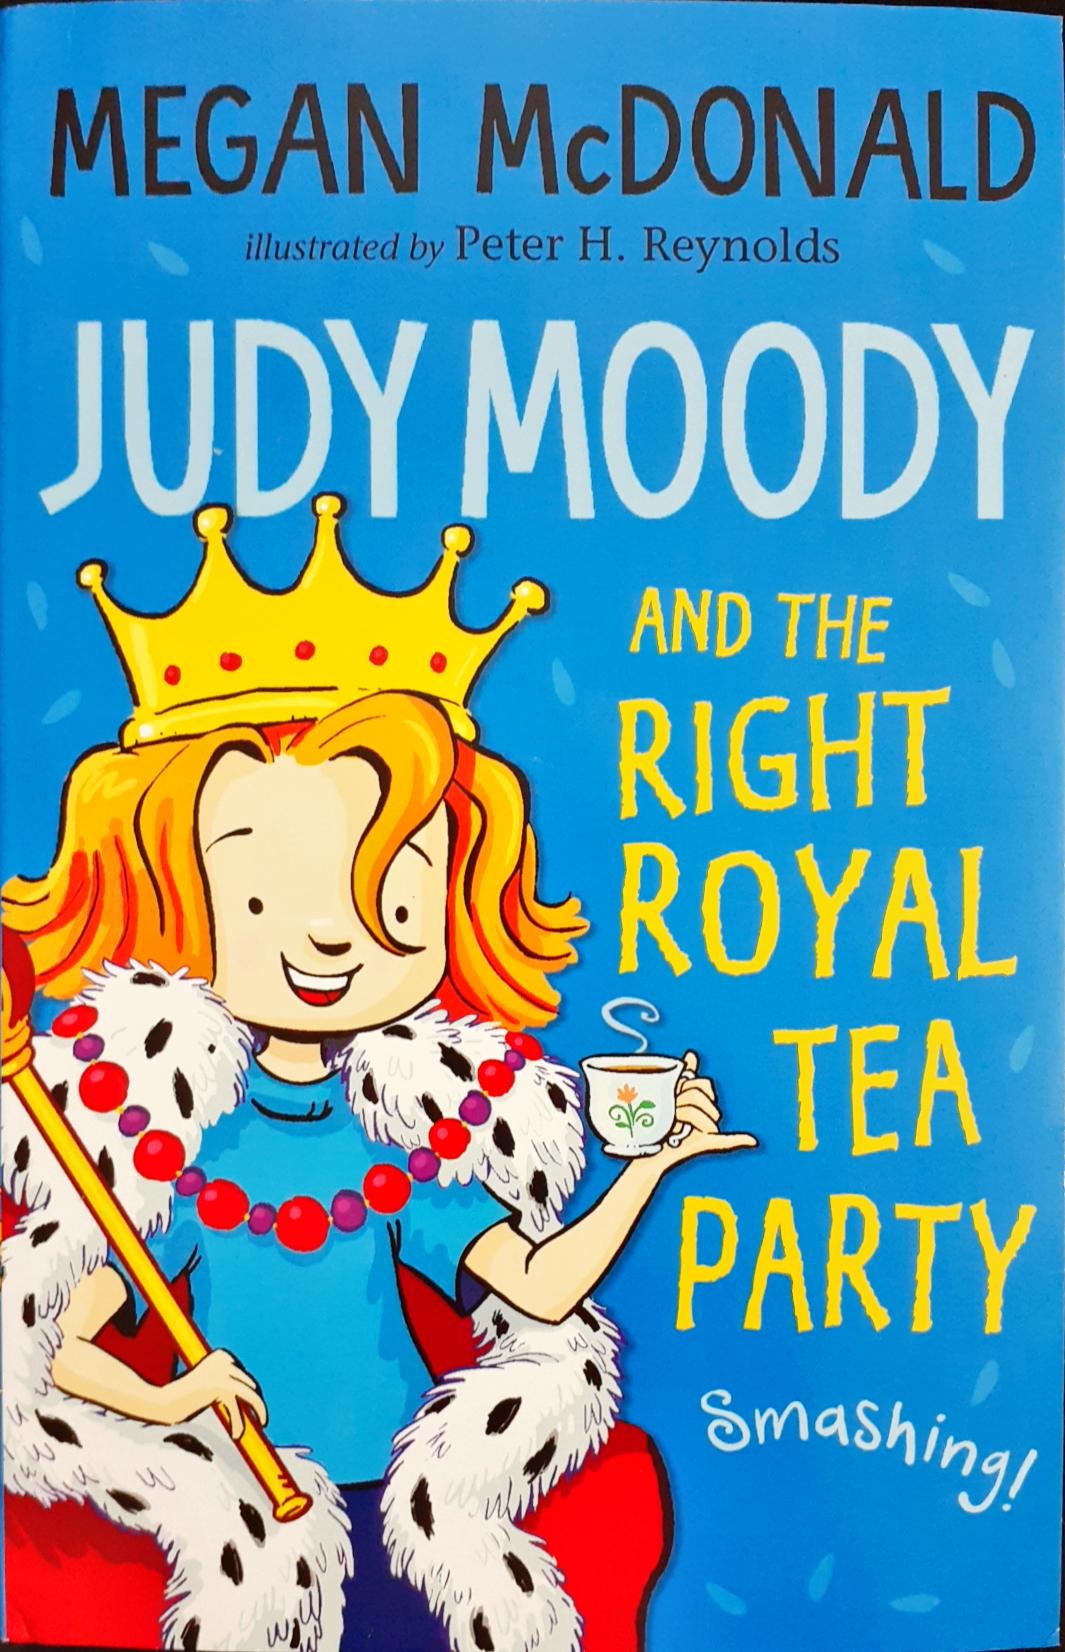 Judy Moody #14 and the Right Royal Tea Party